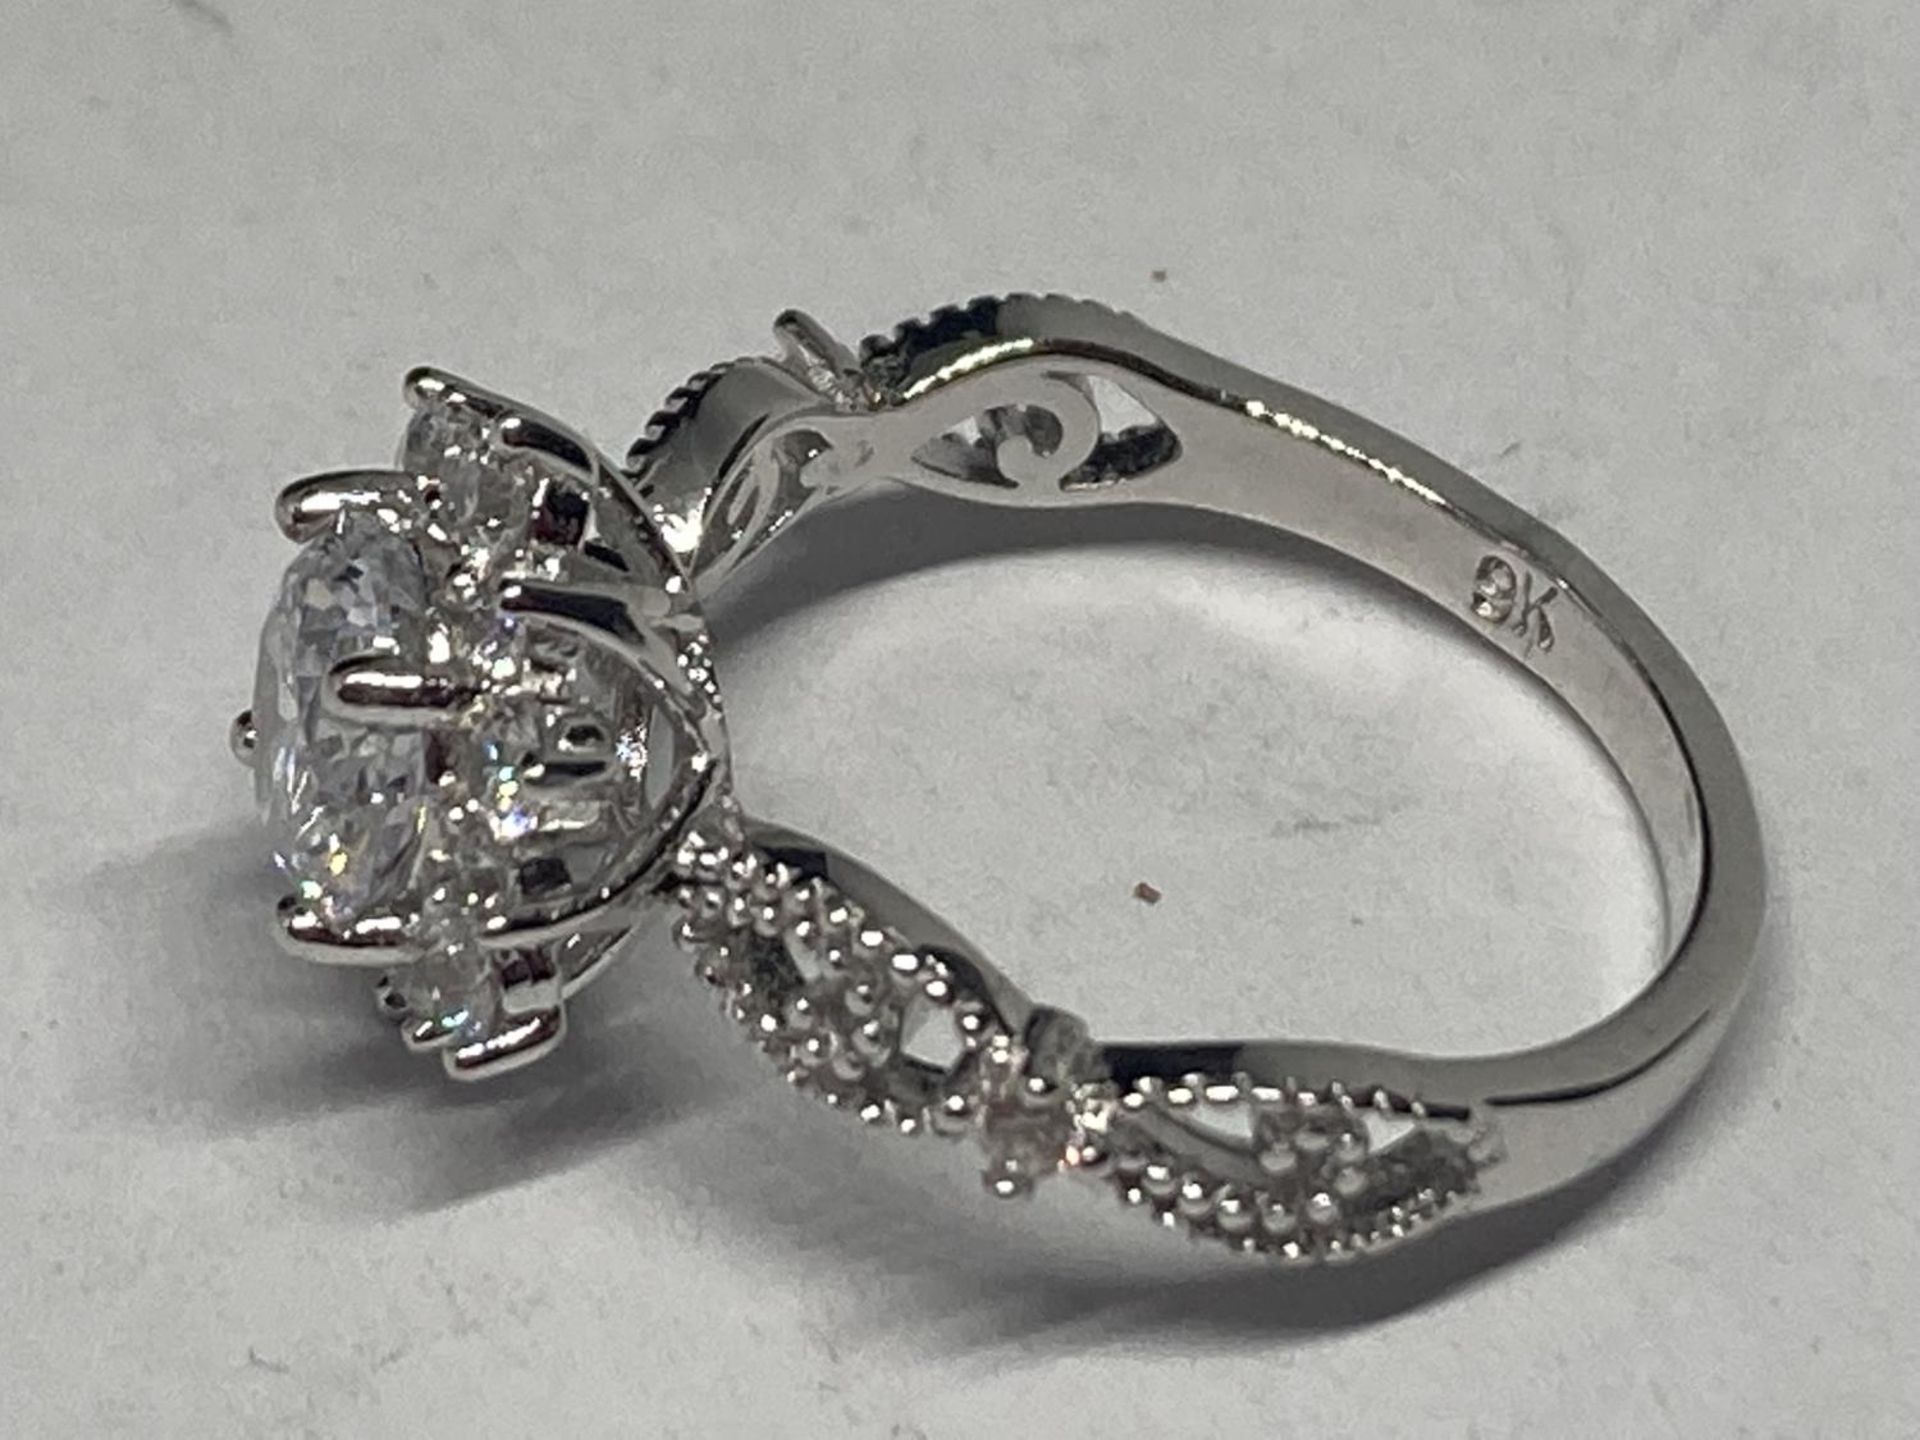 A MARKED 9K RING WITH 1 CARAT OF MOISSANITE SIZE N GROSS WEIGHT 3.05 GRAMS - Image 2 of 3